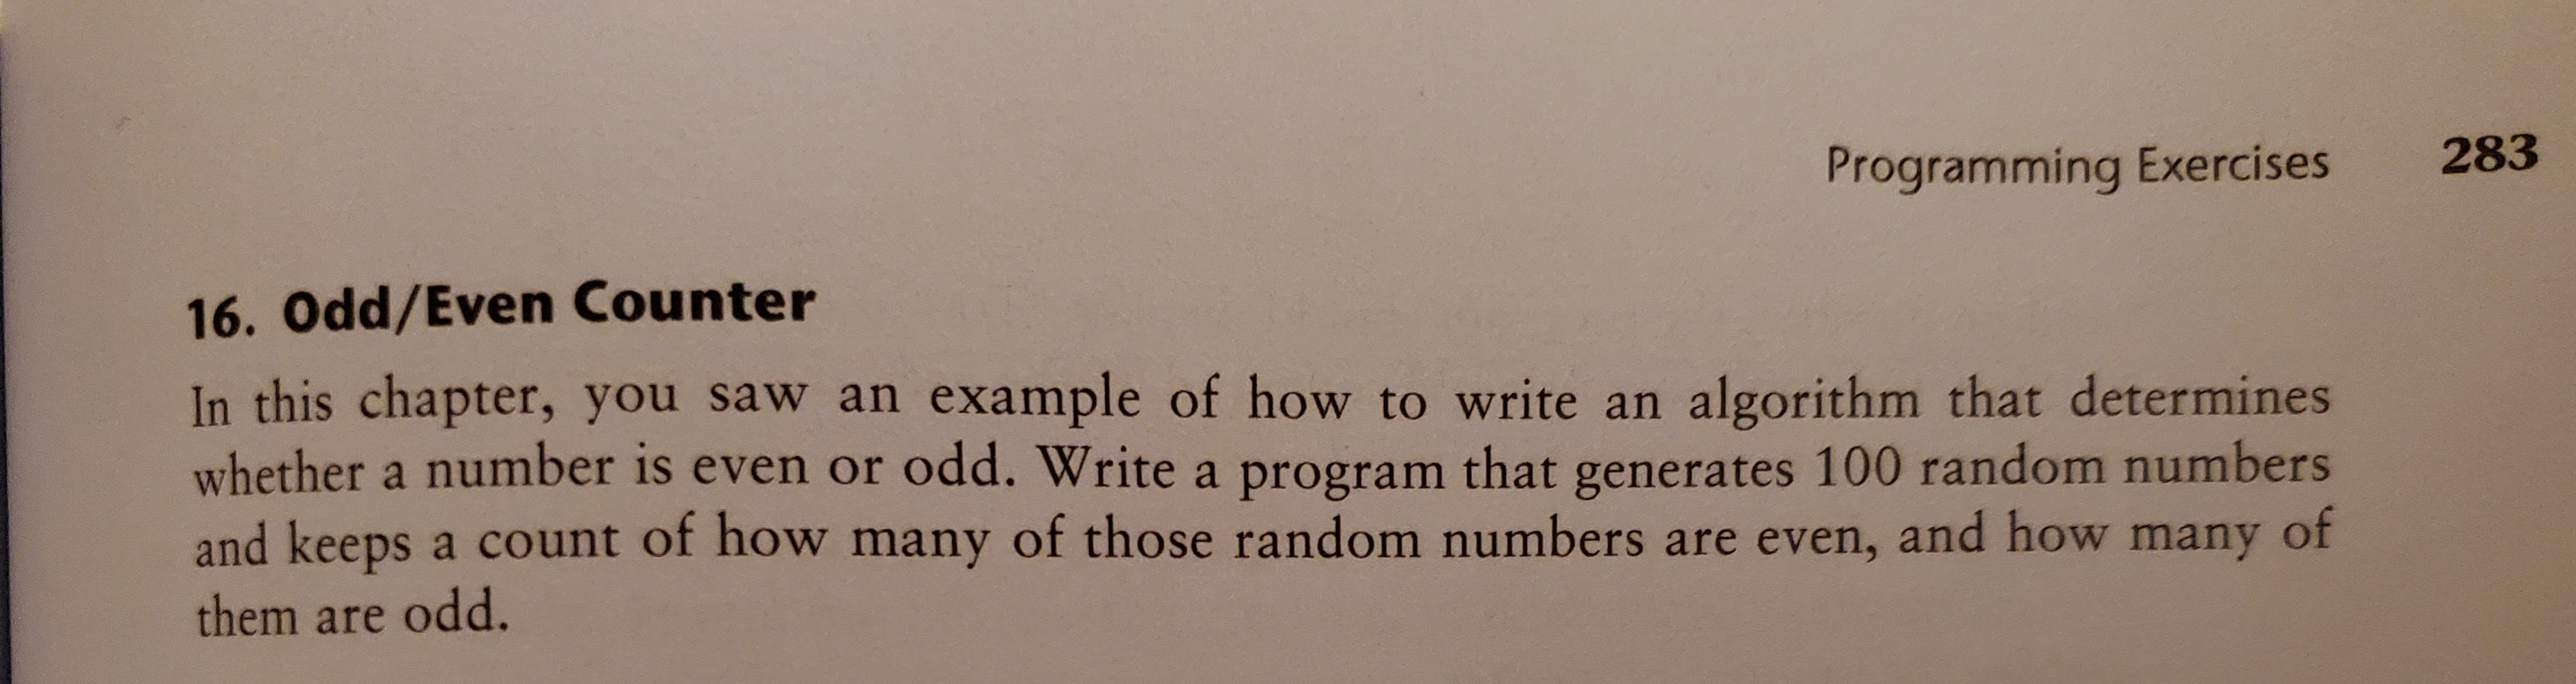 Programming Exercises
283
16. Odd/Even Counter
In this chapter, you saw an example of how to write an algorithm that determines
whether a number is even or odd. Write a program that generates 100 random numbers
and keeps a count of how many of those random numbers are even, and how many of
them are odd.
